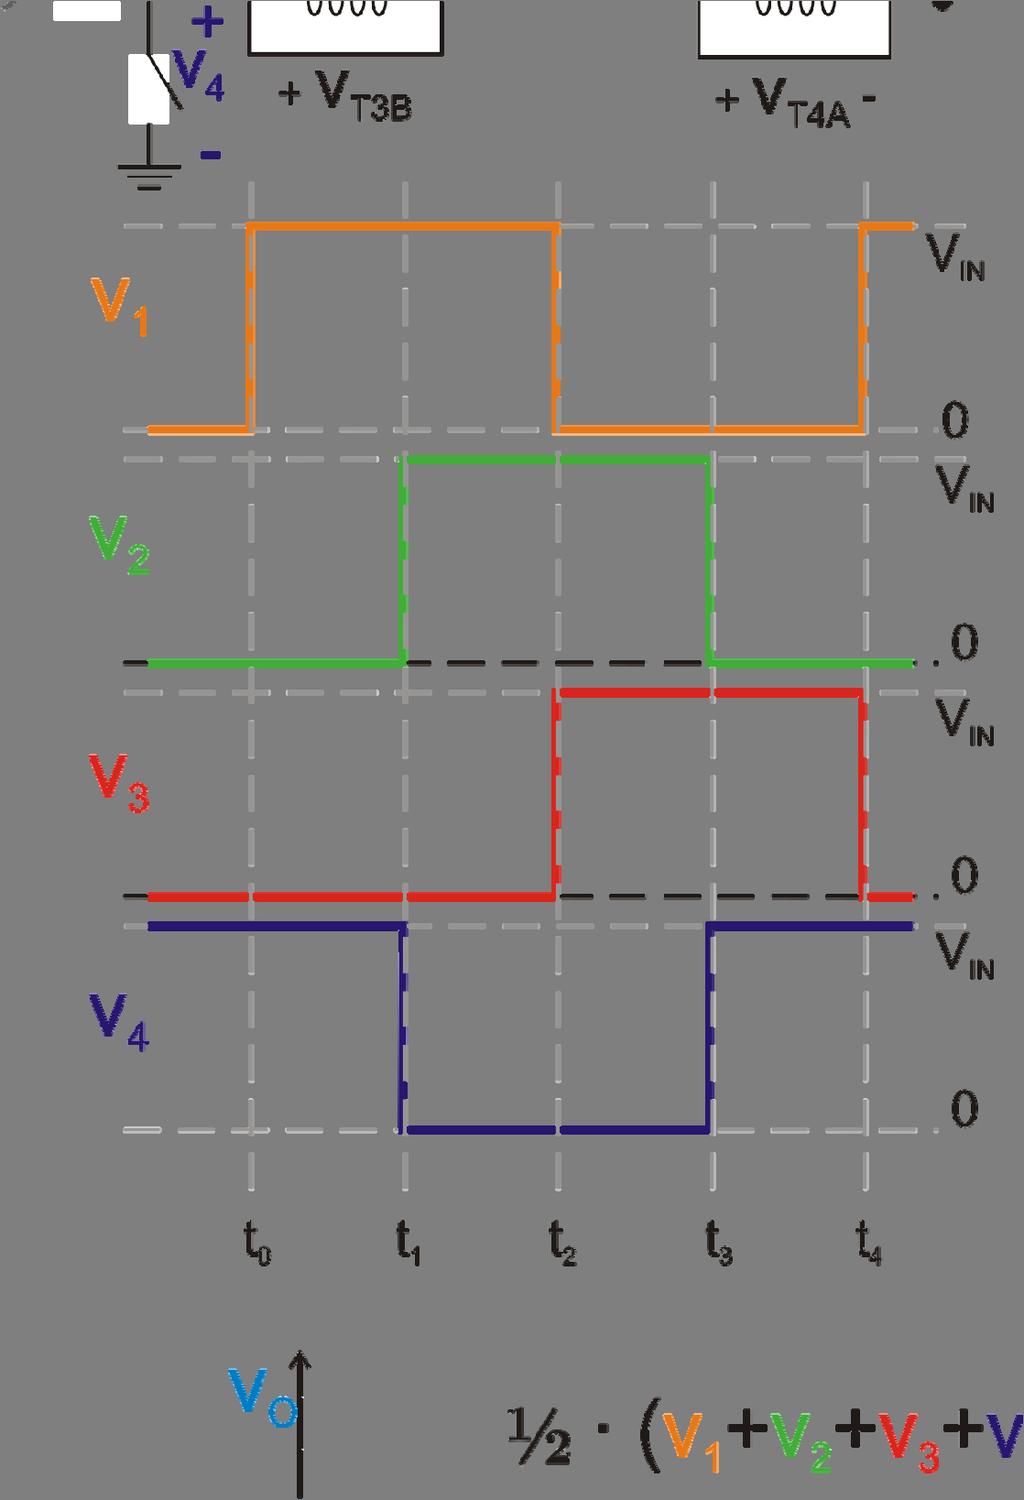 It can be seen that the switching cycle has been divided into four periods (t0 to t4). For every instant of time, there are two phases which are simultaneously connected to V IN.